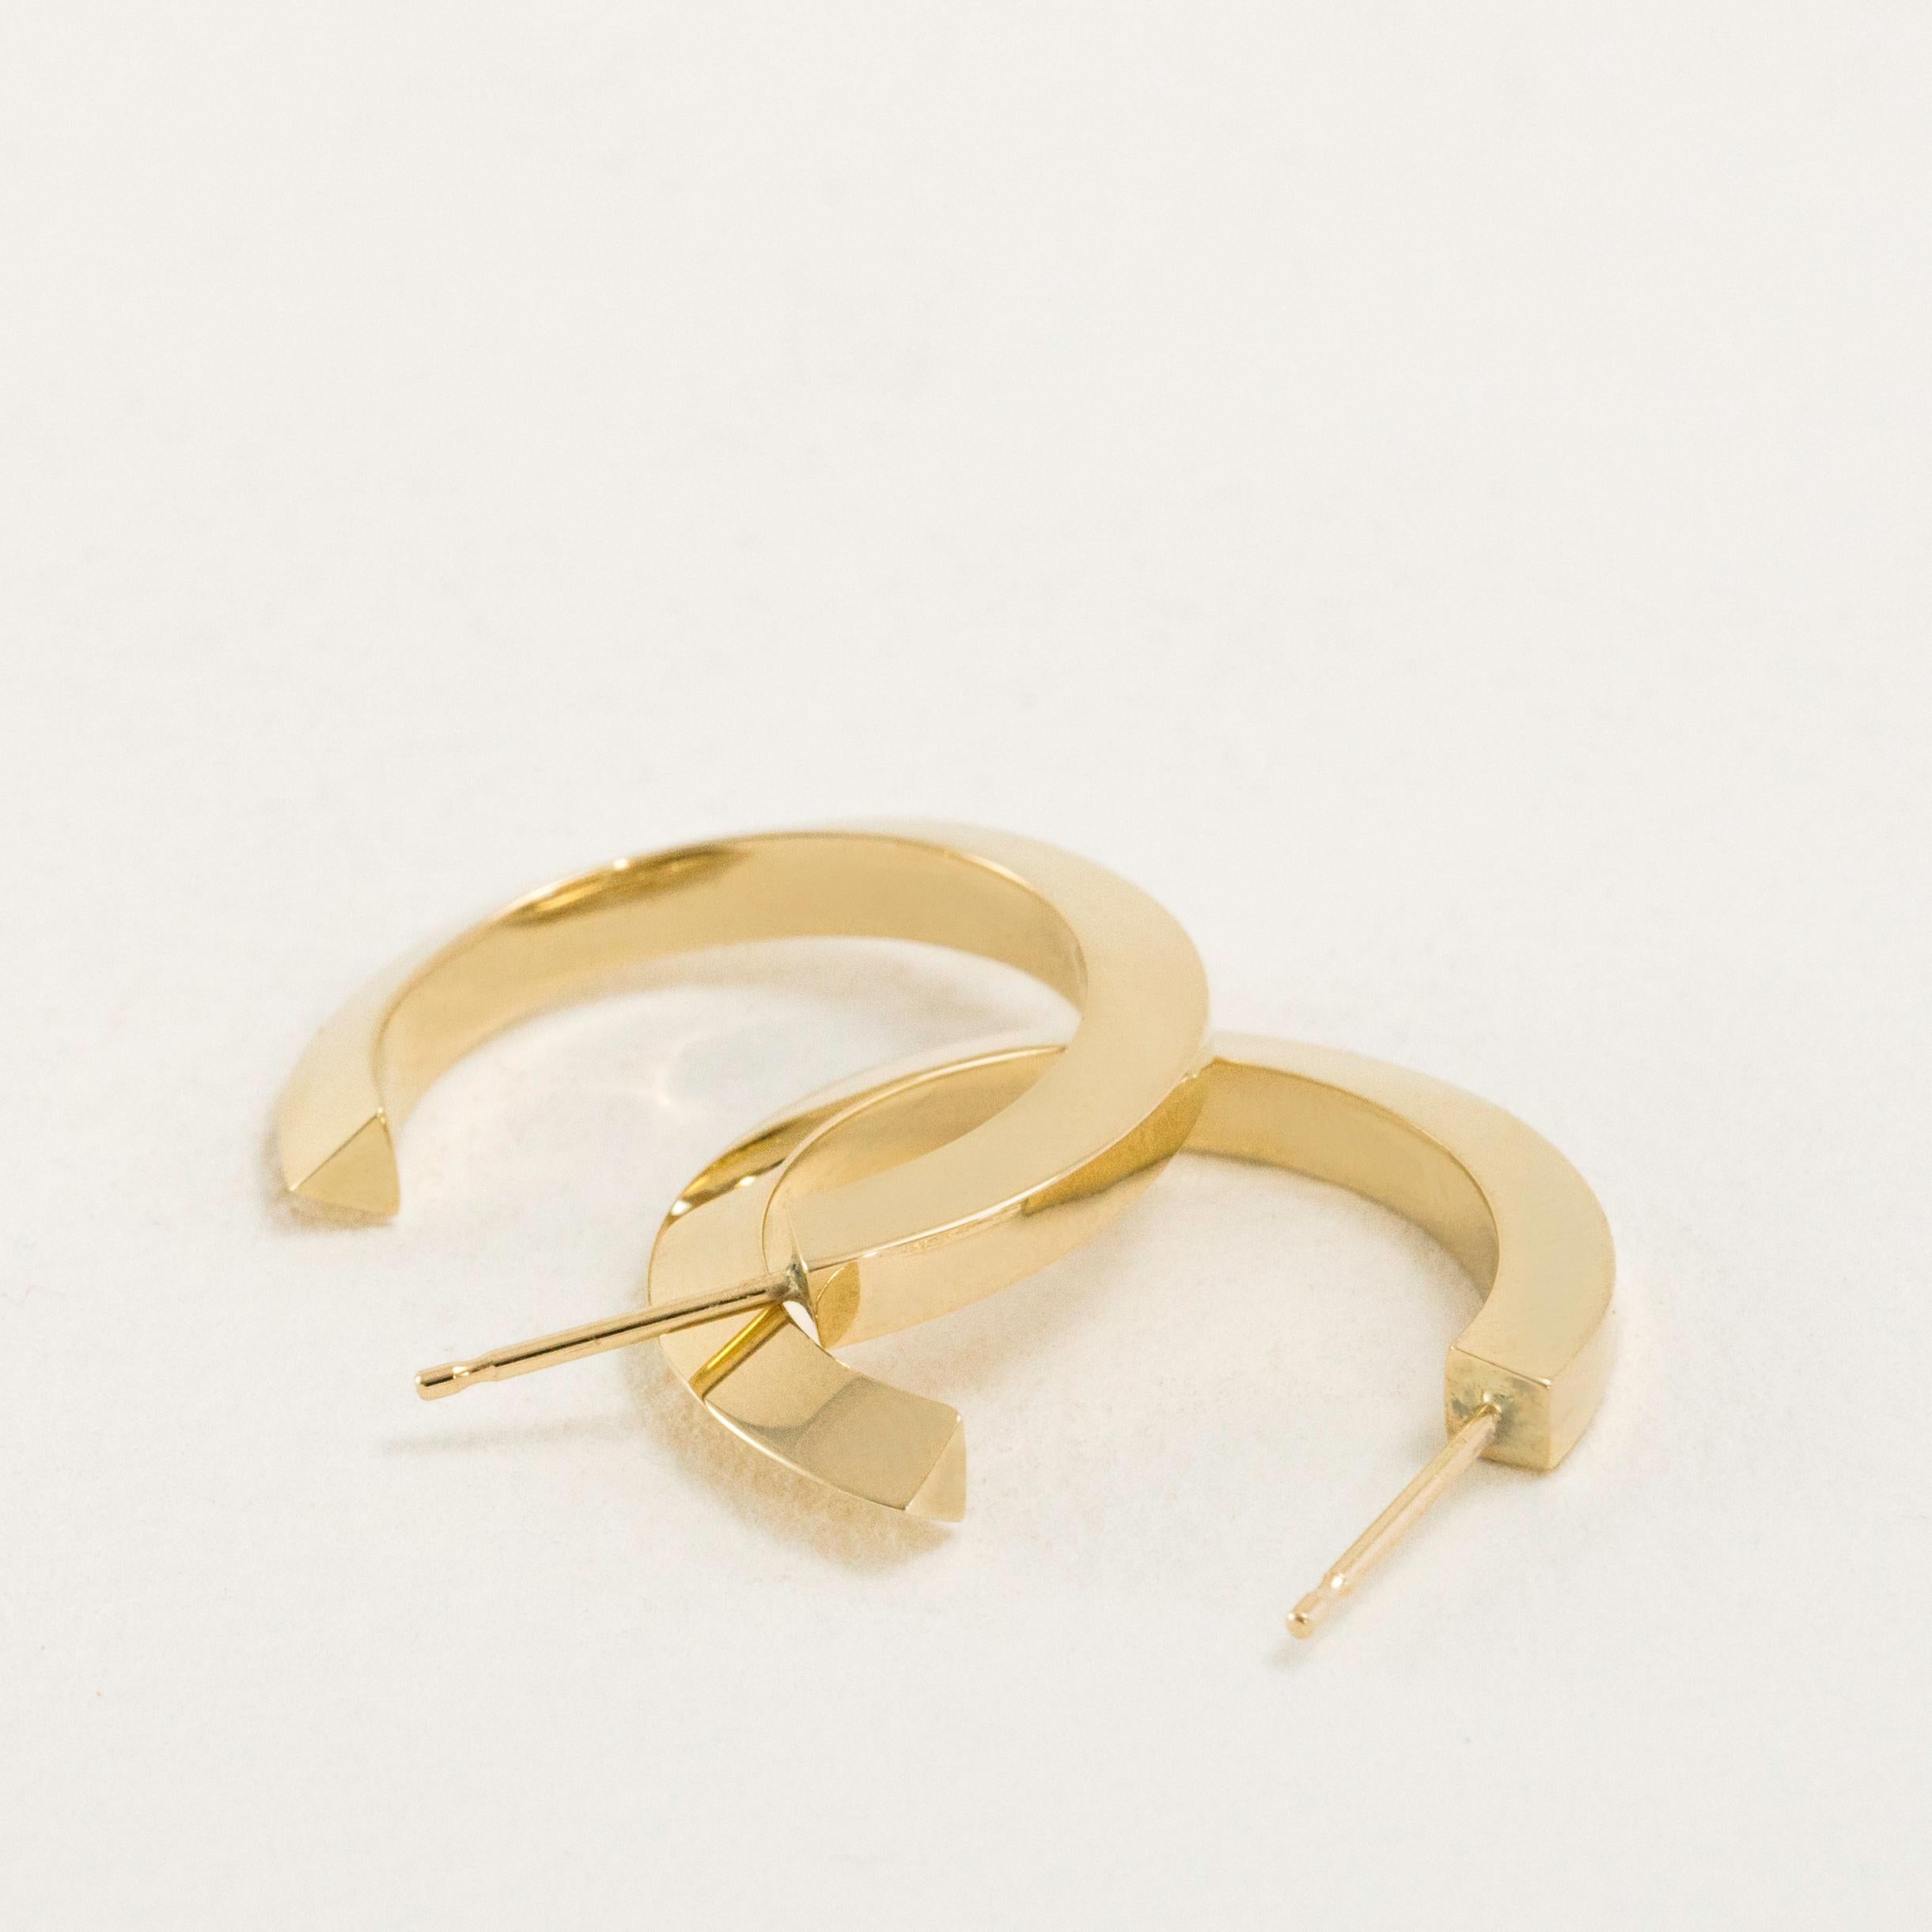 Contemporary 14 Karat Gold, Flow Hoop Earrings Transitioning from a Square to Triangle For Sale